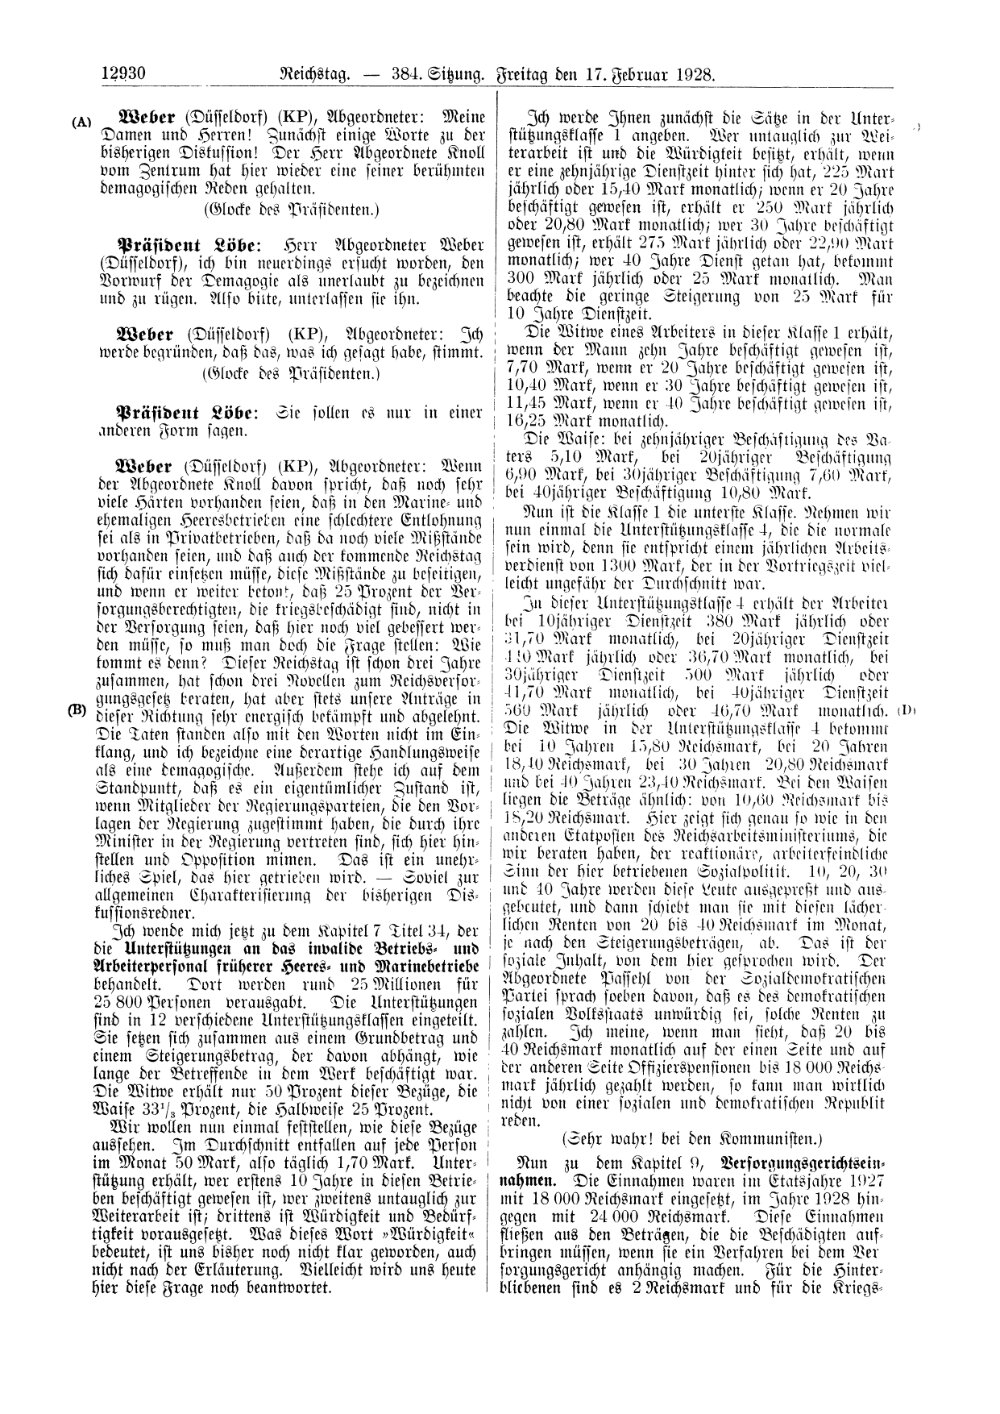 Scan of page 12930